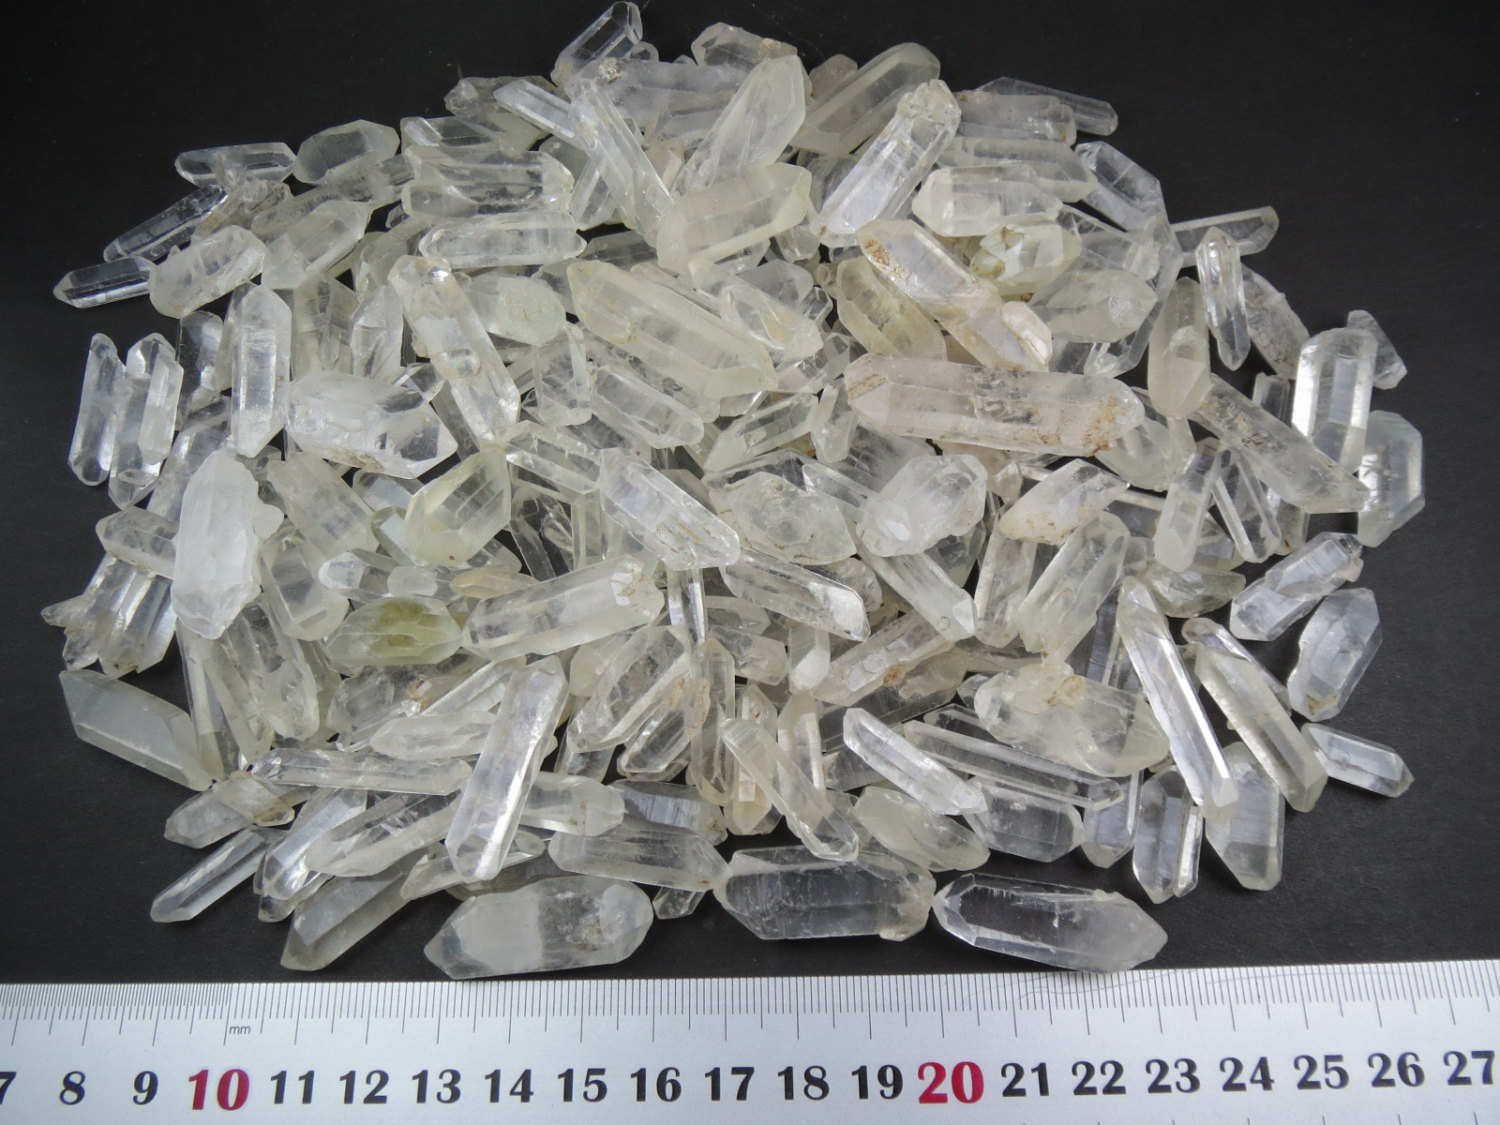 Gorgeous -------100 gm-------double terminated crystal clear Quartz from Baluchi - $10.00